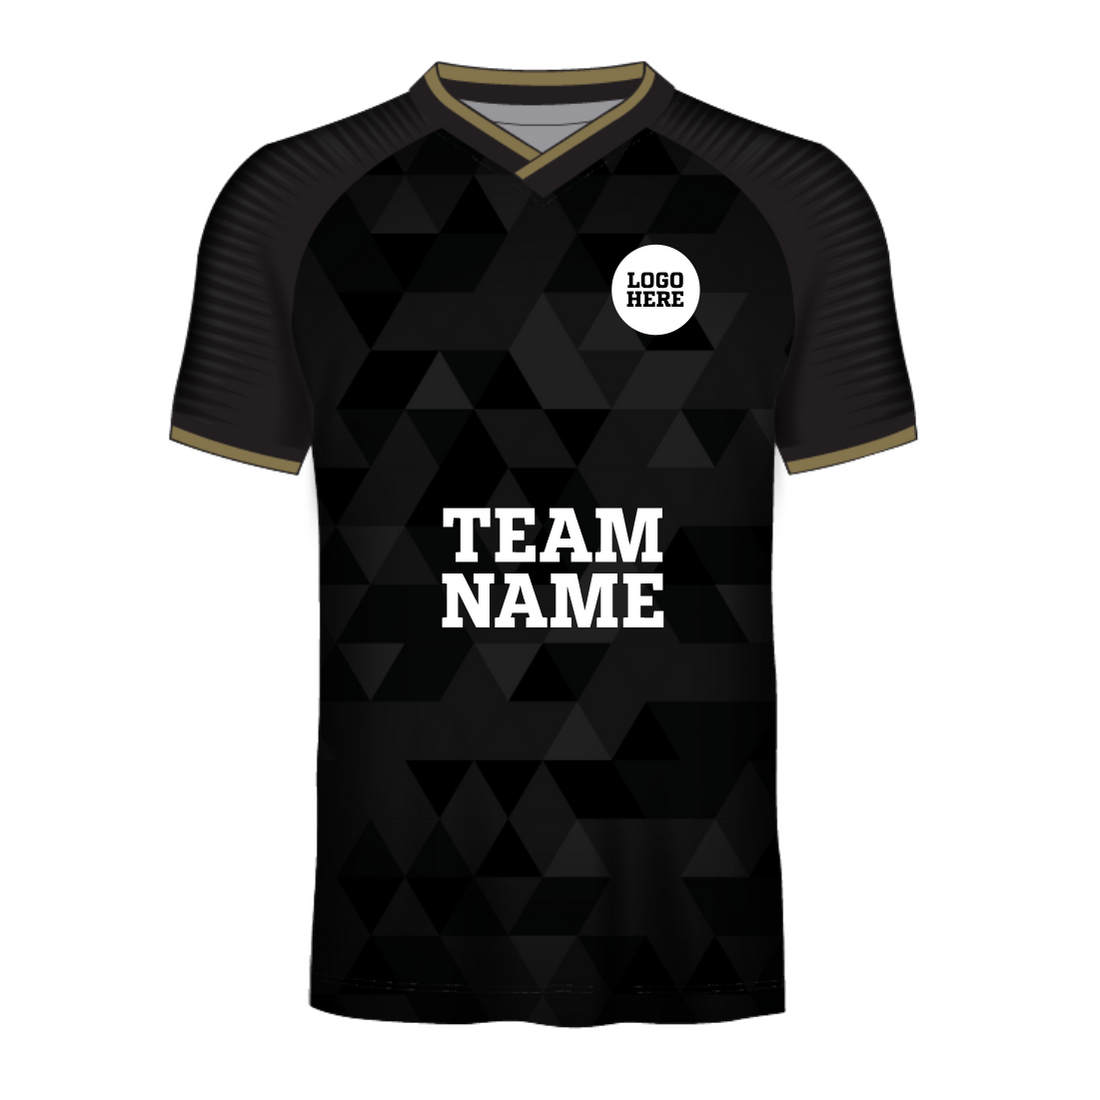 NEXT PRINT All Over Printed Customized Sublimation T-Shirt Unisex Sports Jersey Player Name & Number, Team Name And Logo. 1142847749